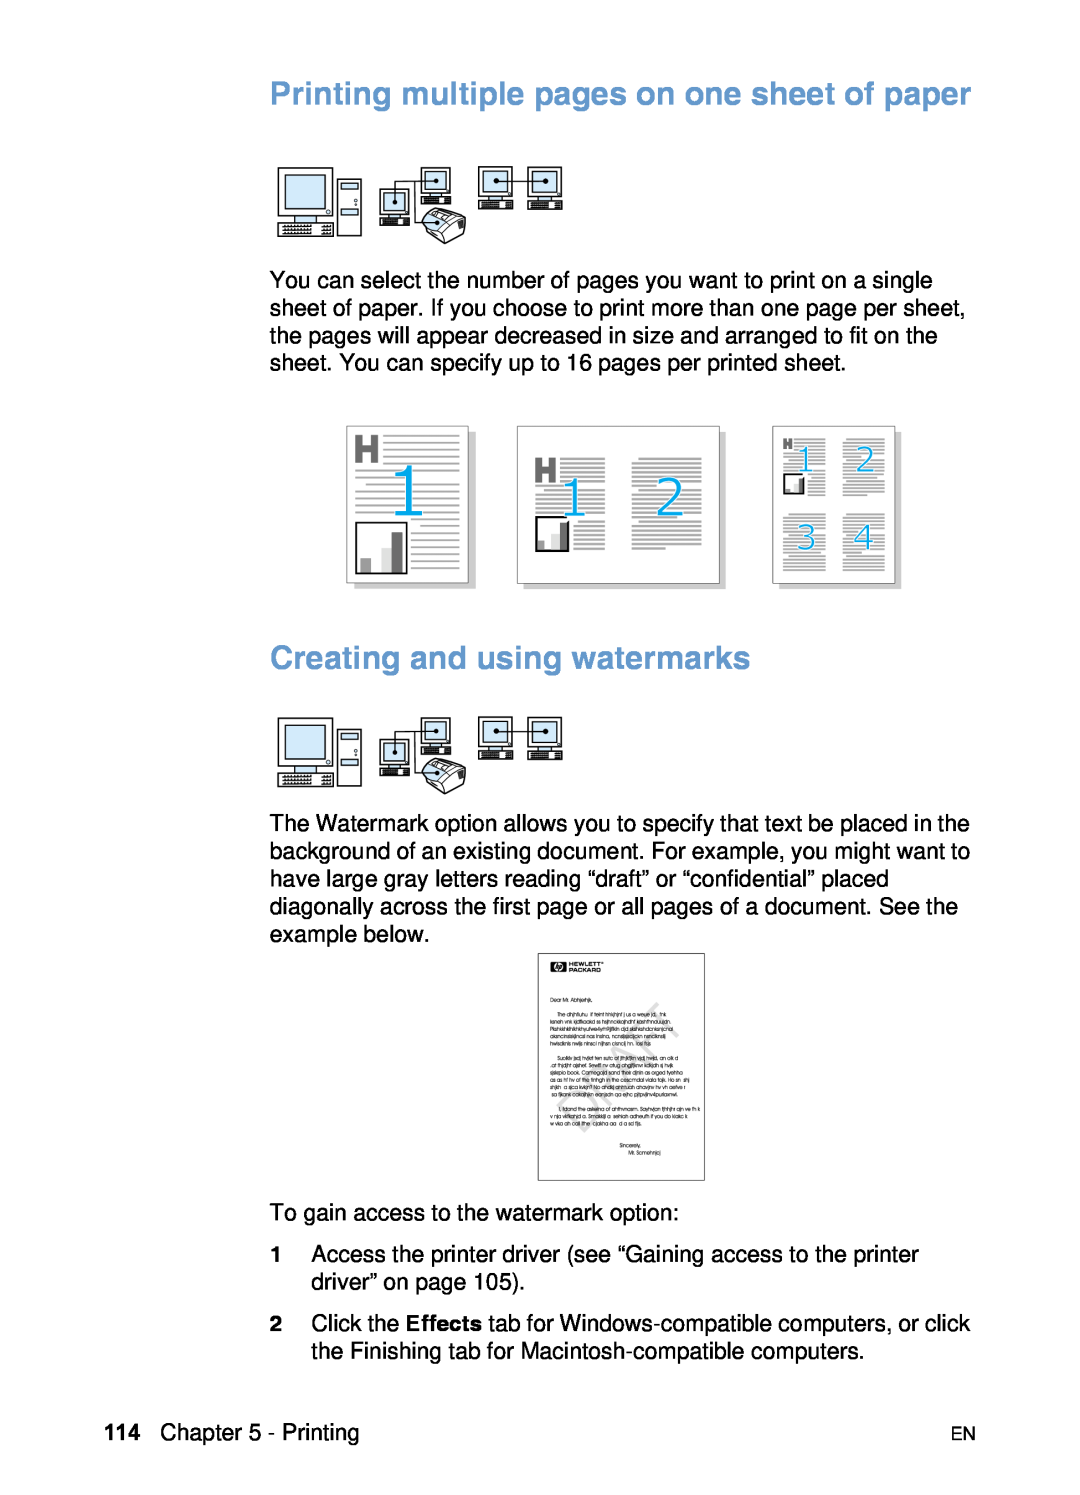 HP 3200 manual Printing multiple pages on one sheet of paper, Creating and using watermarks 